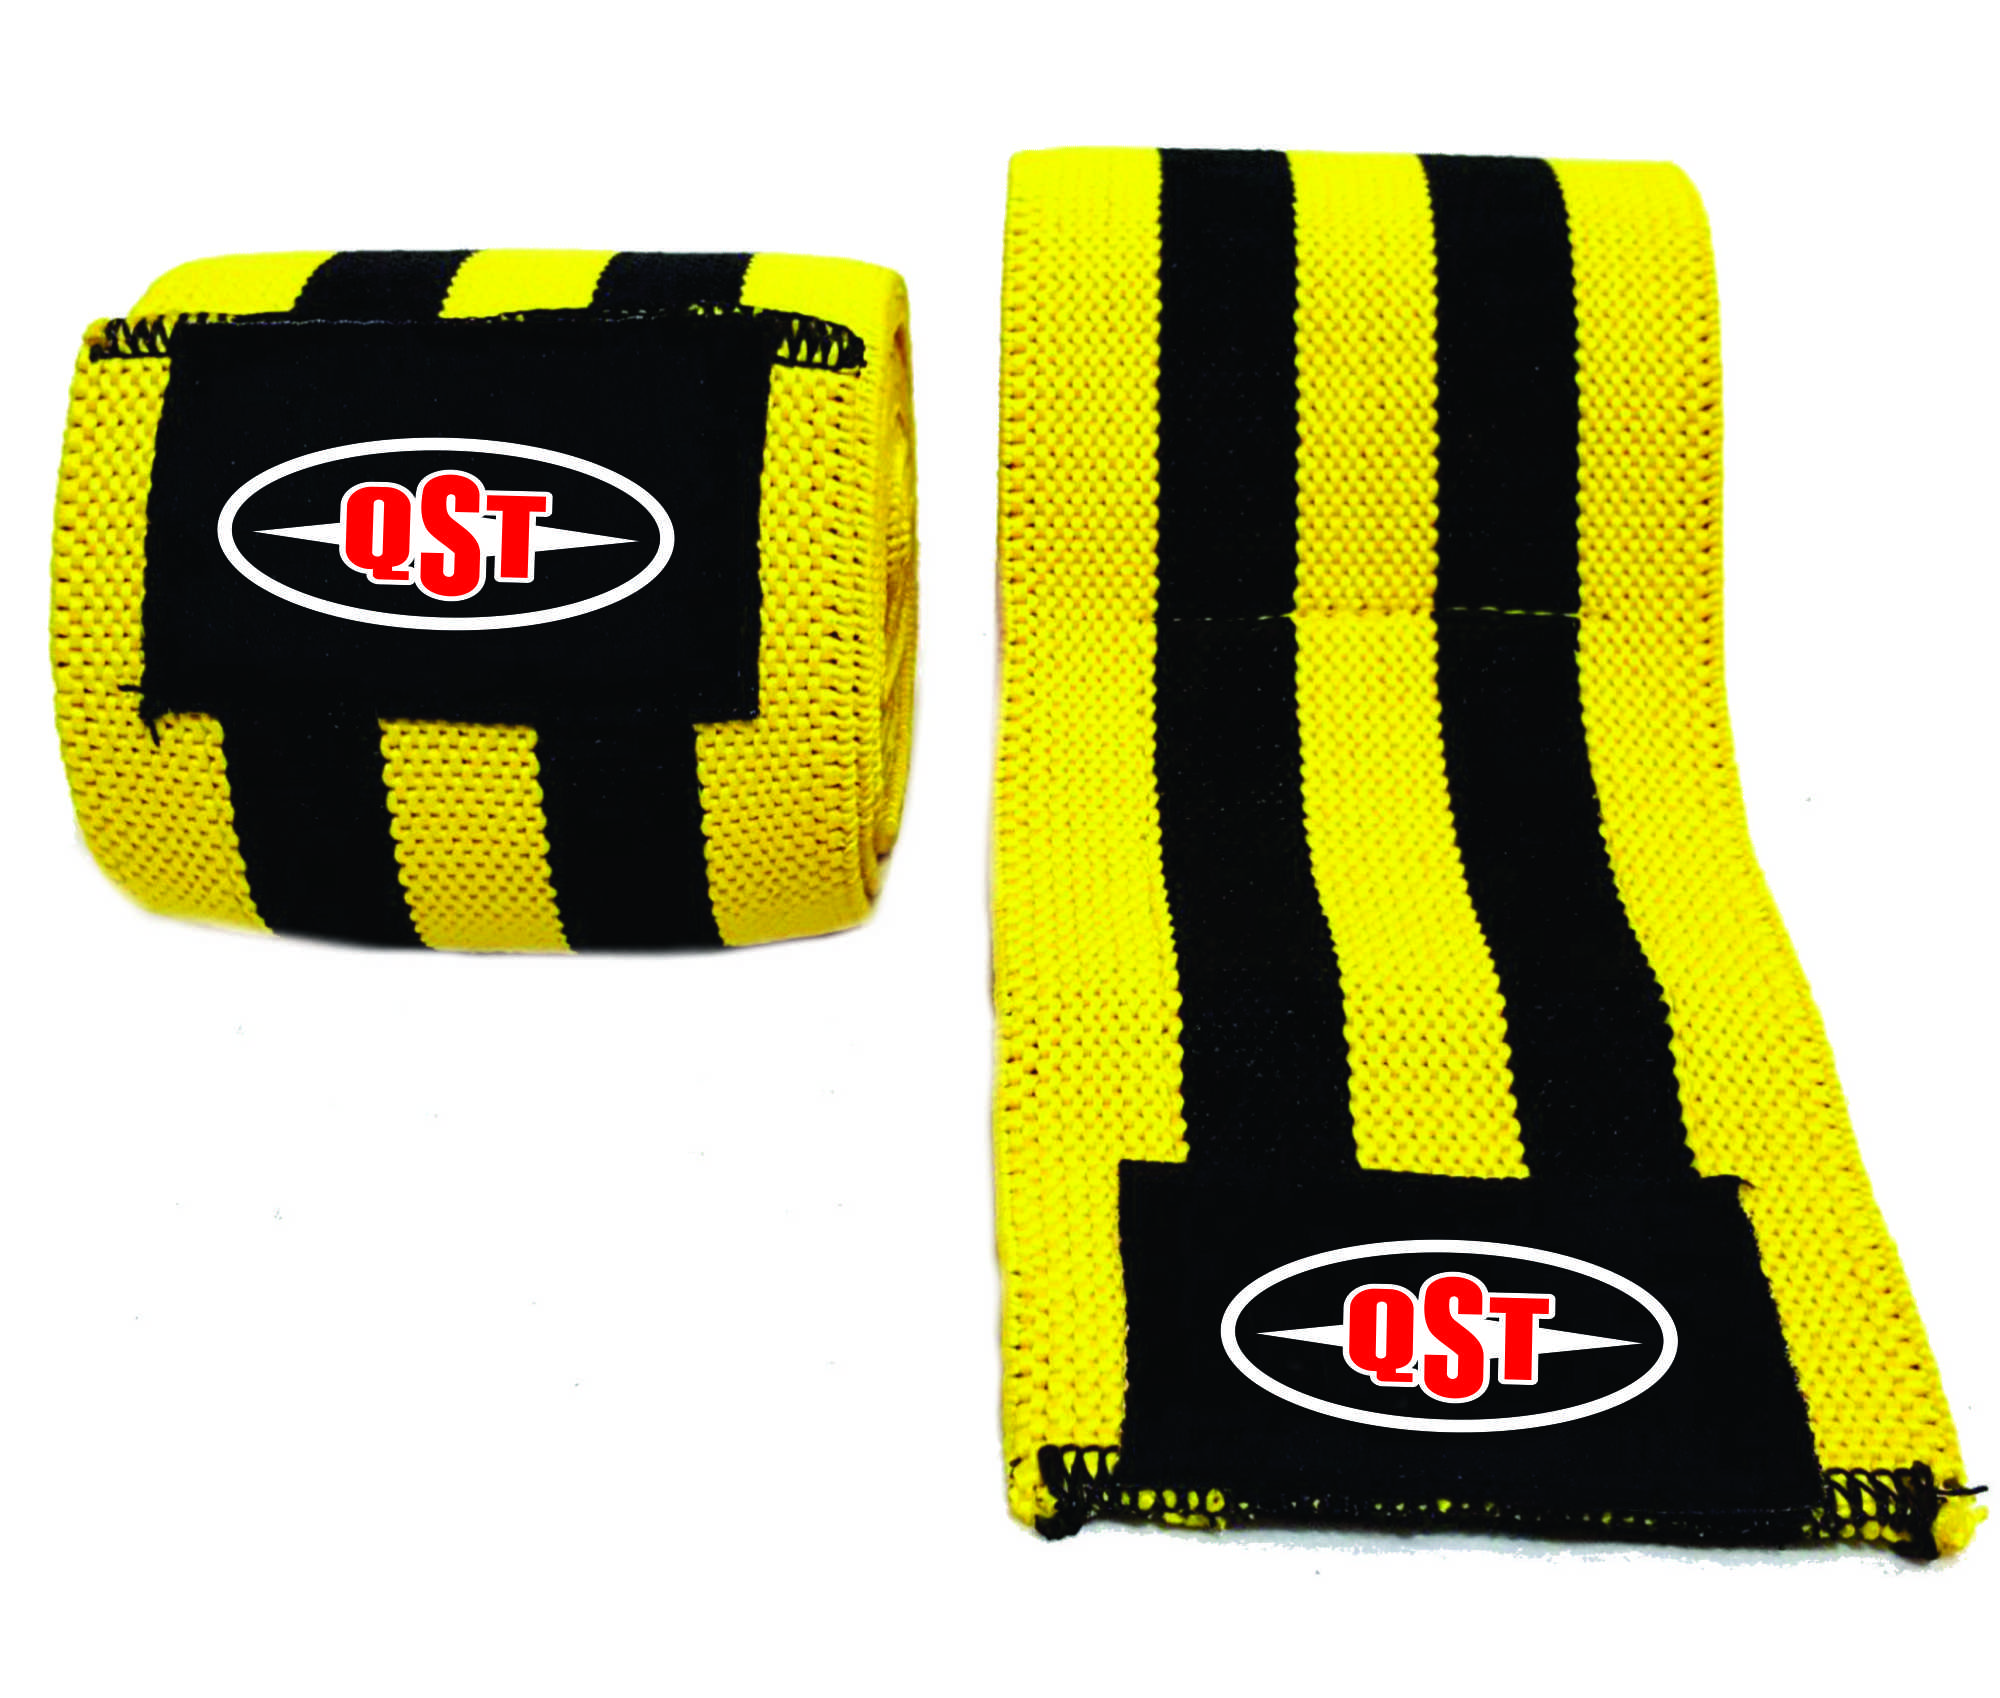 Weightlifting Knee Wraps - ACS-1528